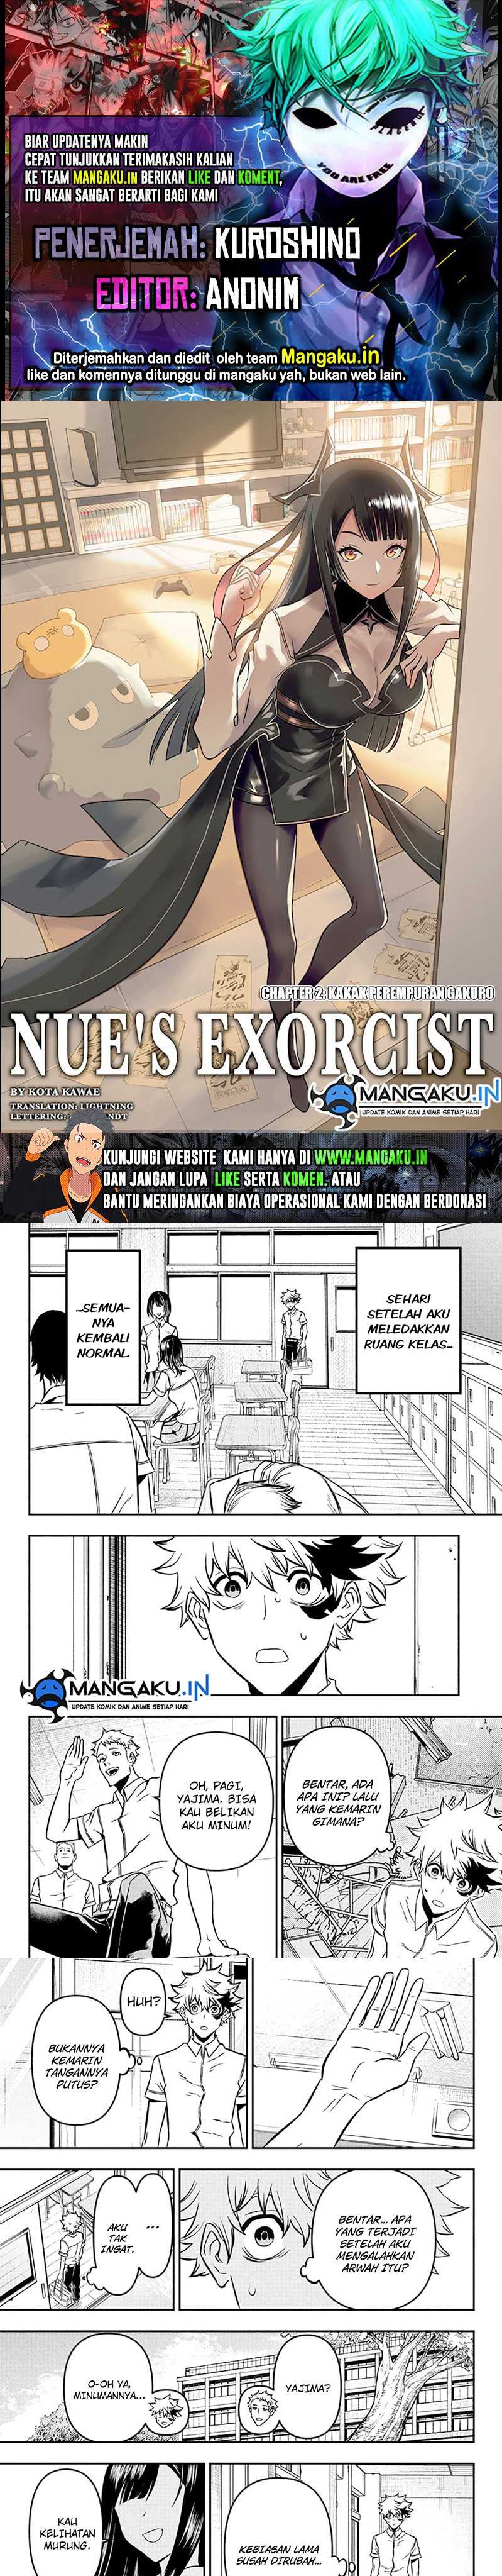 Nue’s Exorcist Chapter 02